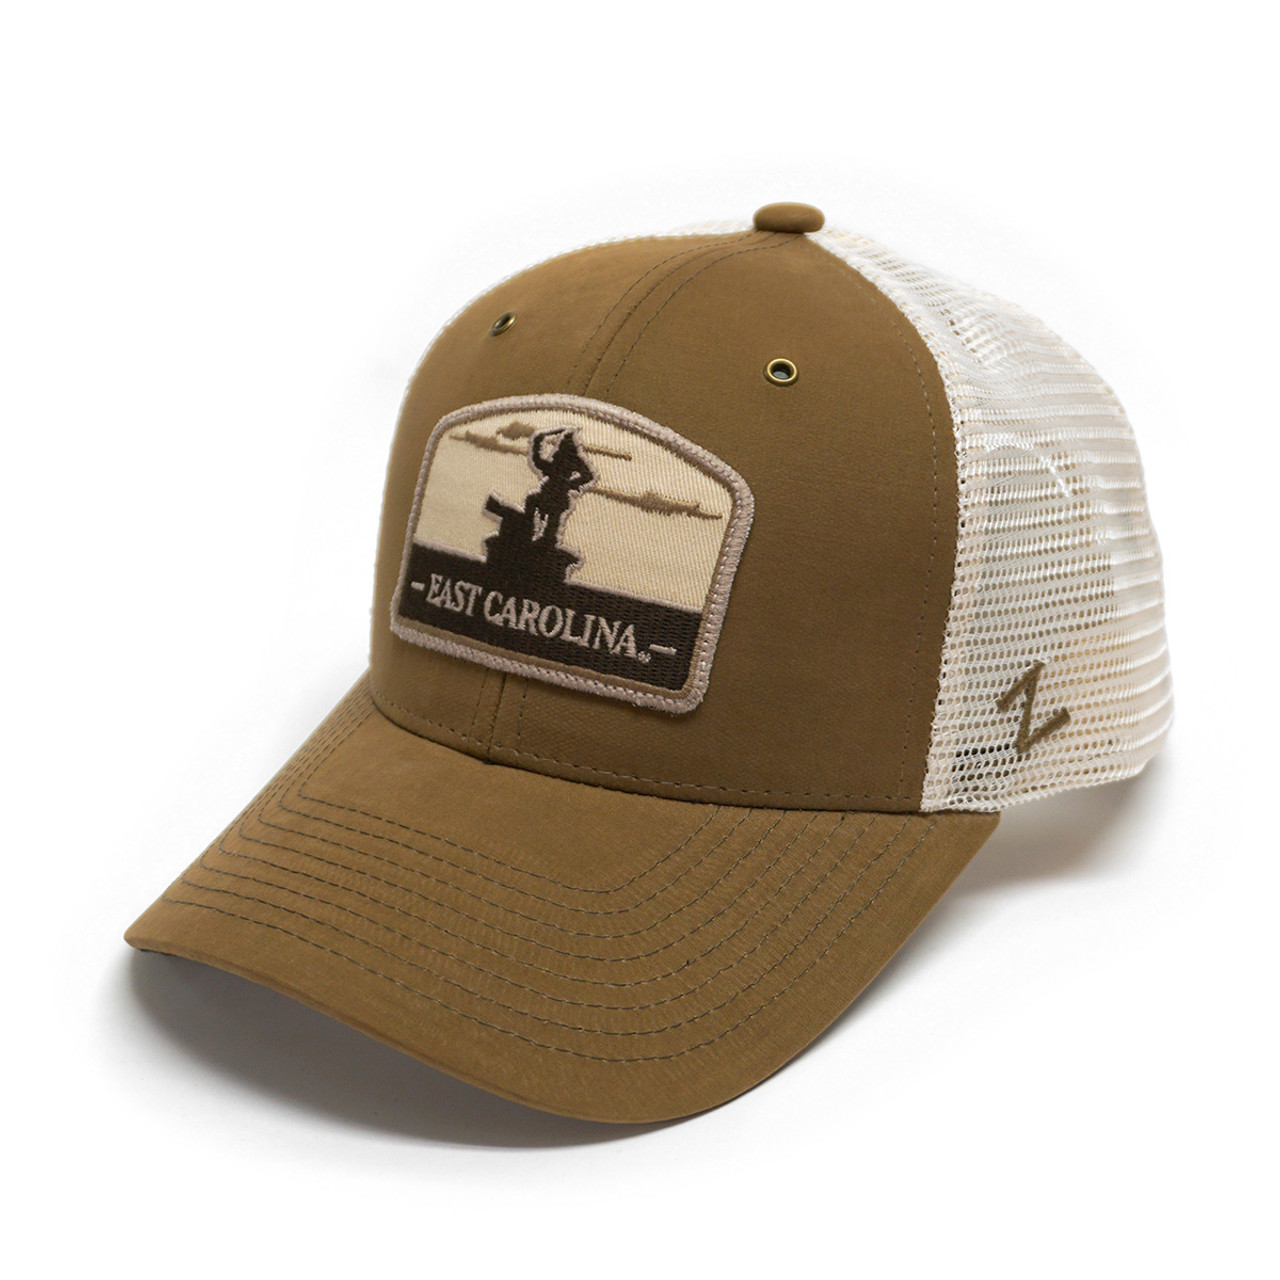 ESEE Adventure Cap Coyote Brown, cap  Advantageously shopping at